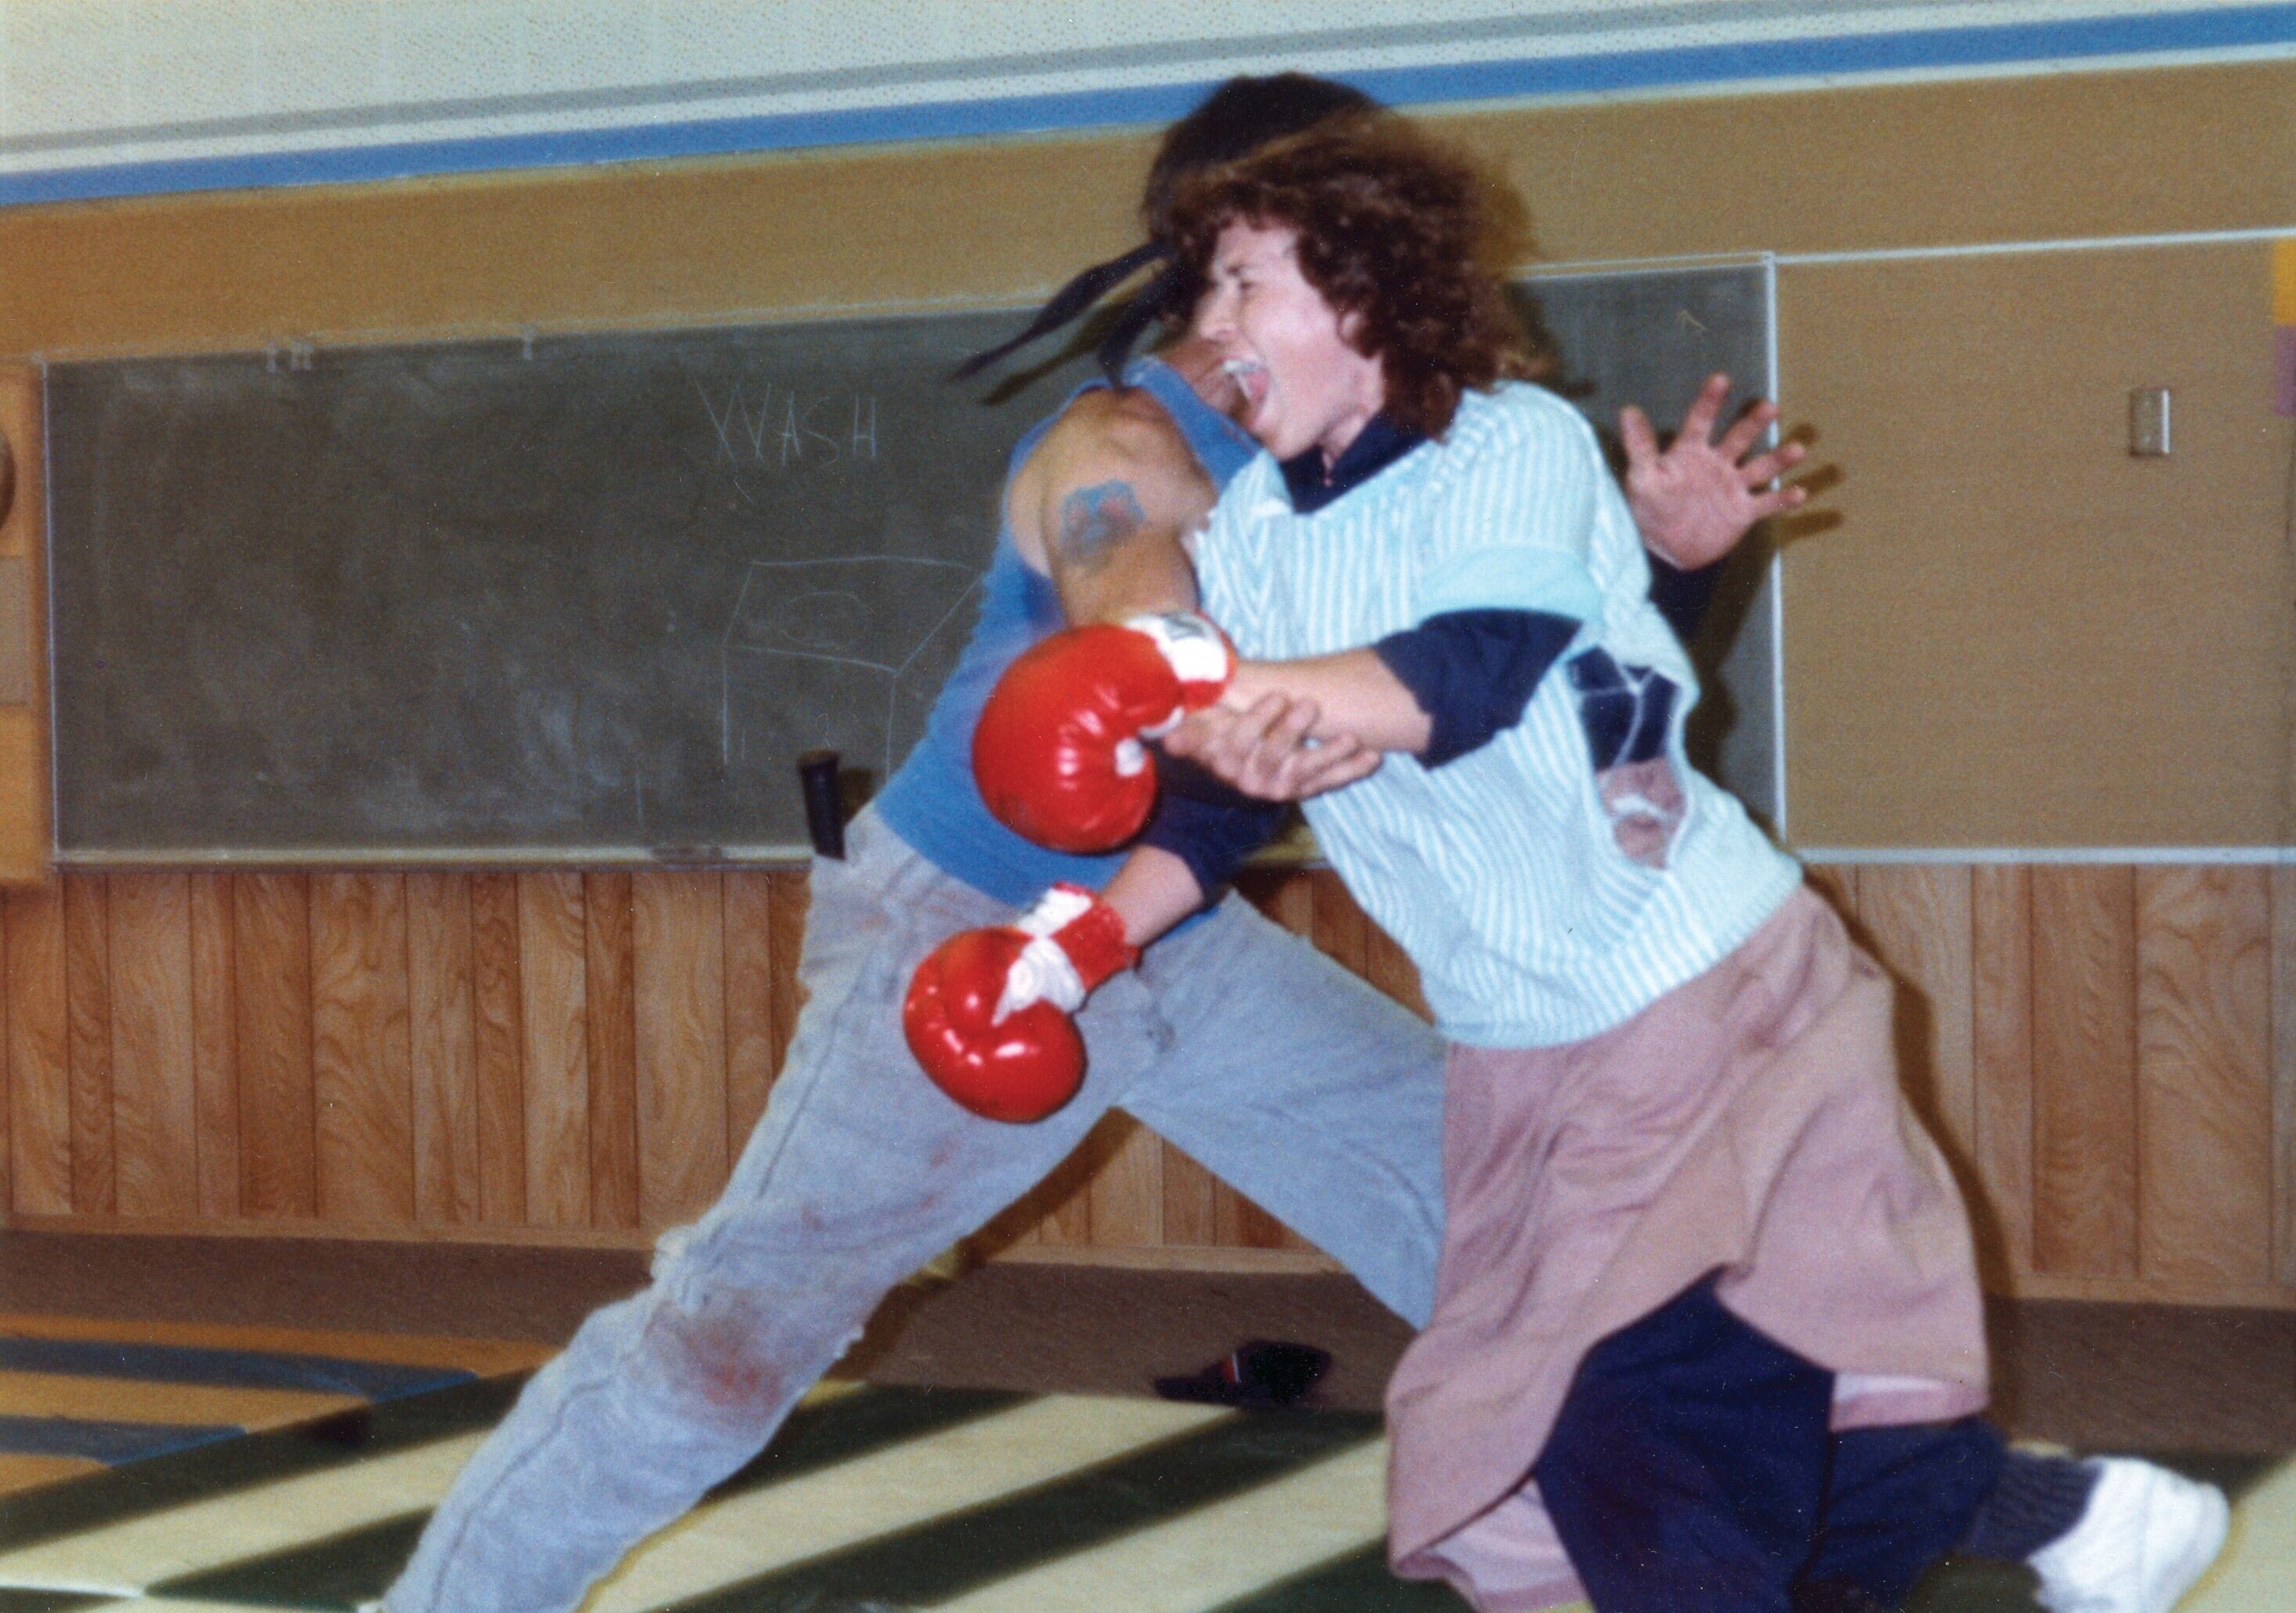 Jim also developed the most realistic, and effective, women's self-defense program in the world, which has appeared on television, in books, and many articles.